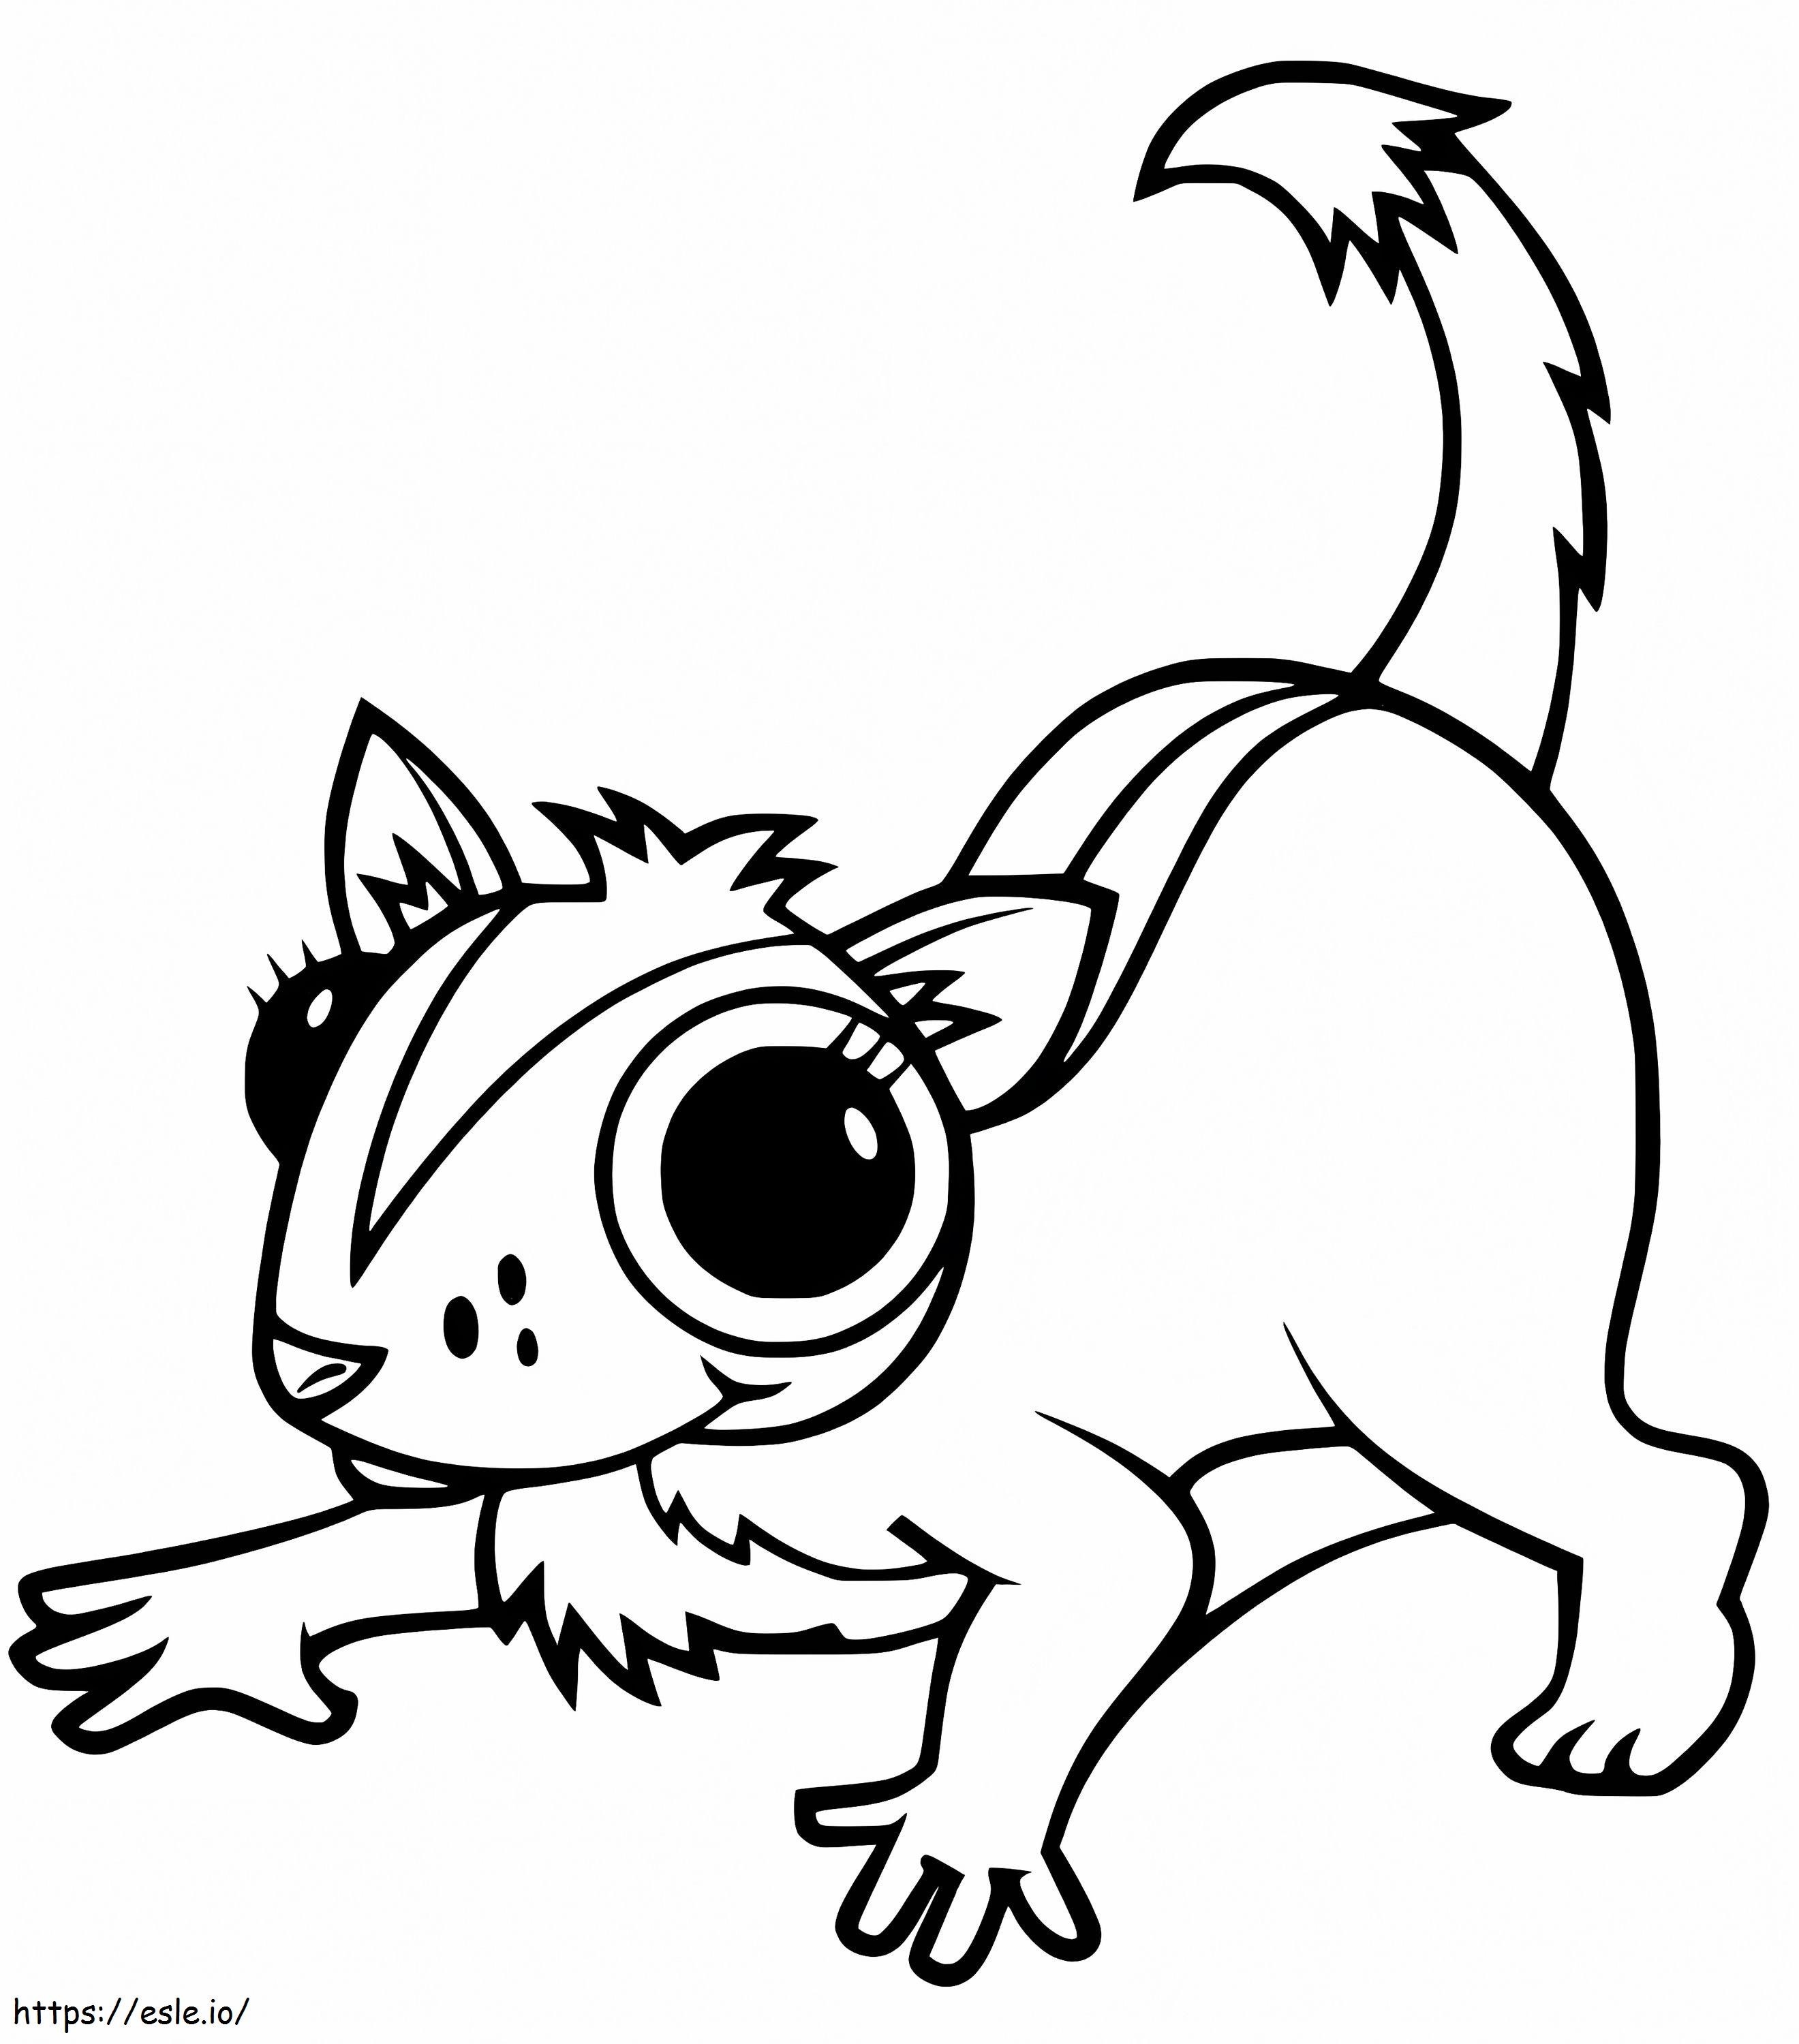 Lovely Sugar Glider coloring page